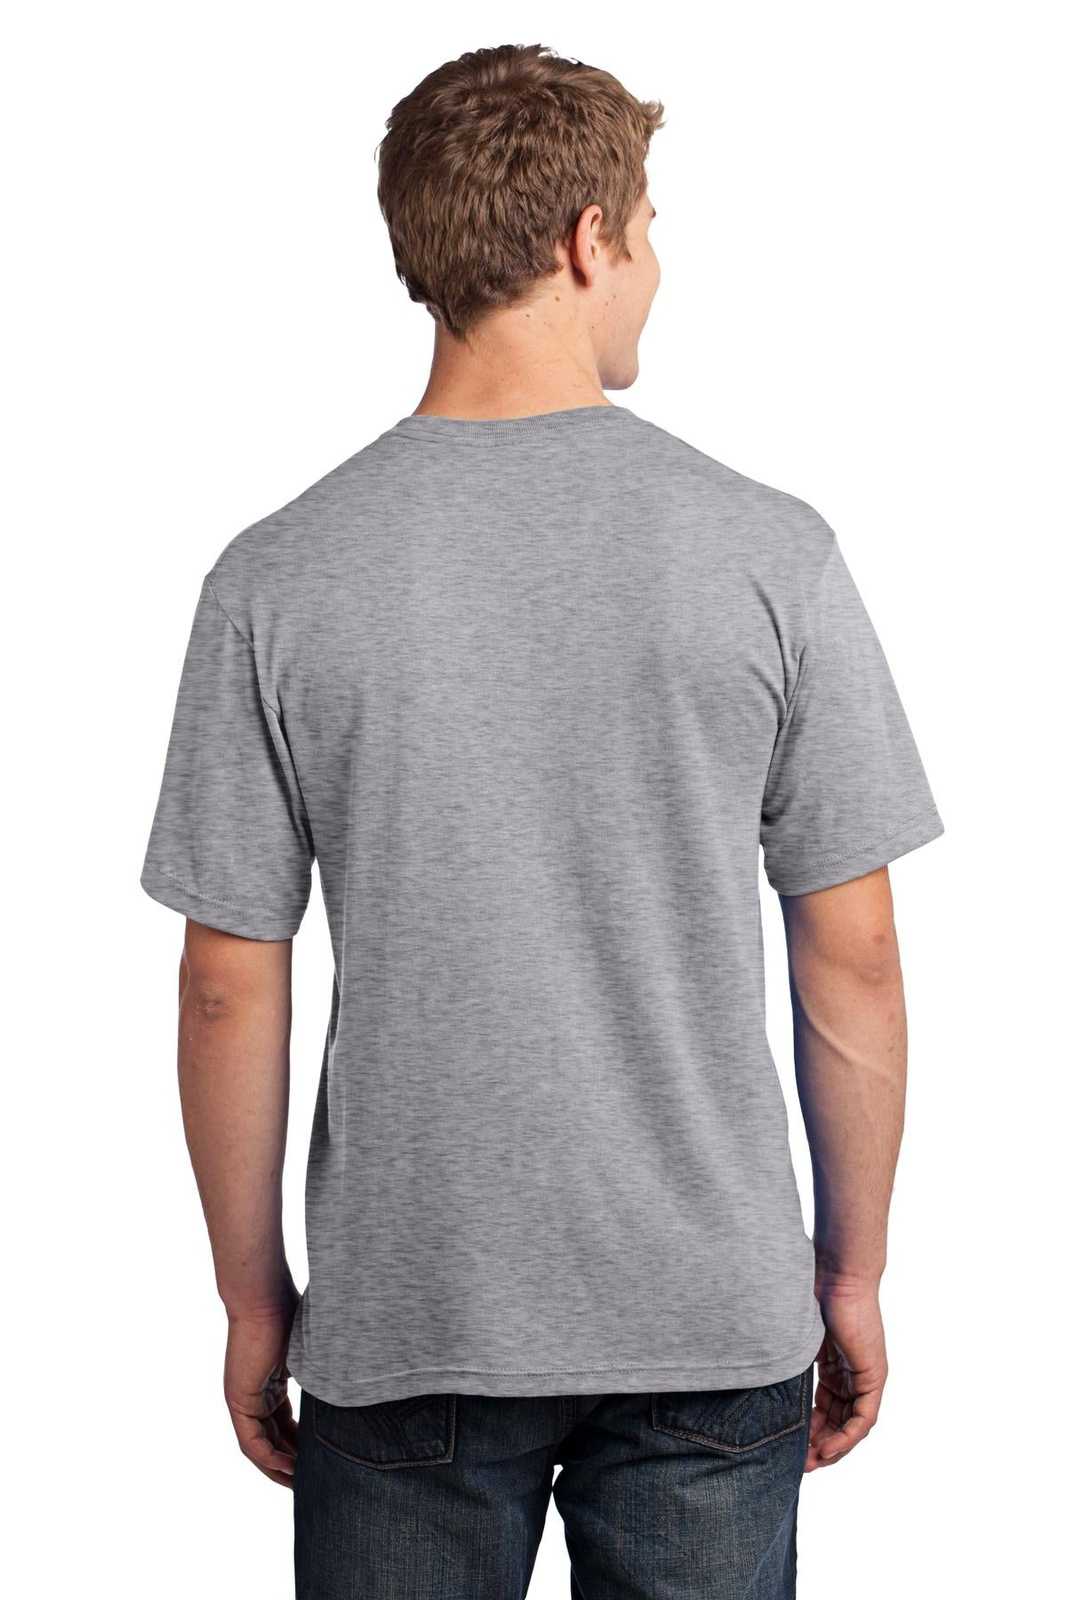 Port & Company USA100P All-American Pocket Tee - Athletic Heather - HIT a Double - 1